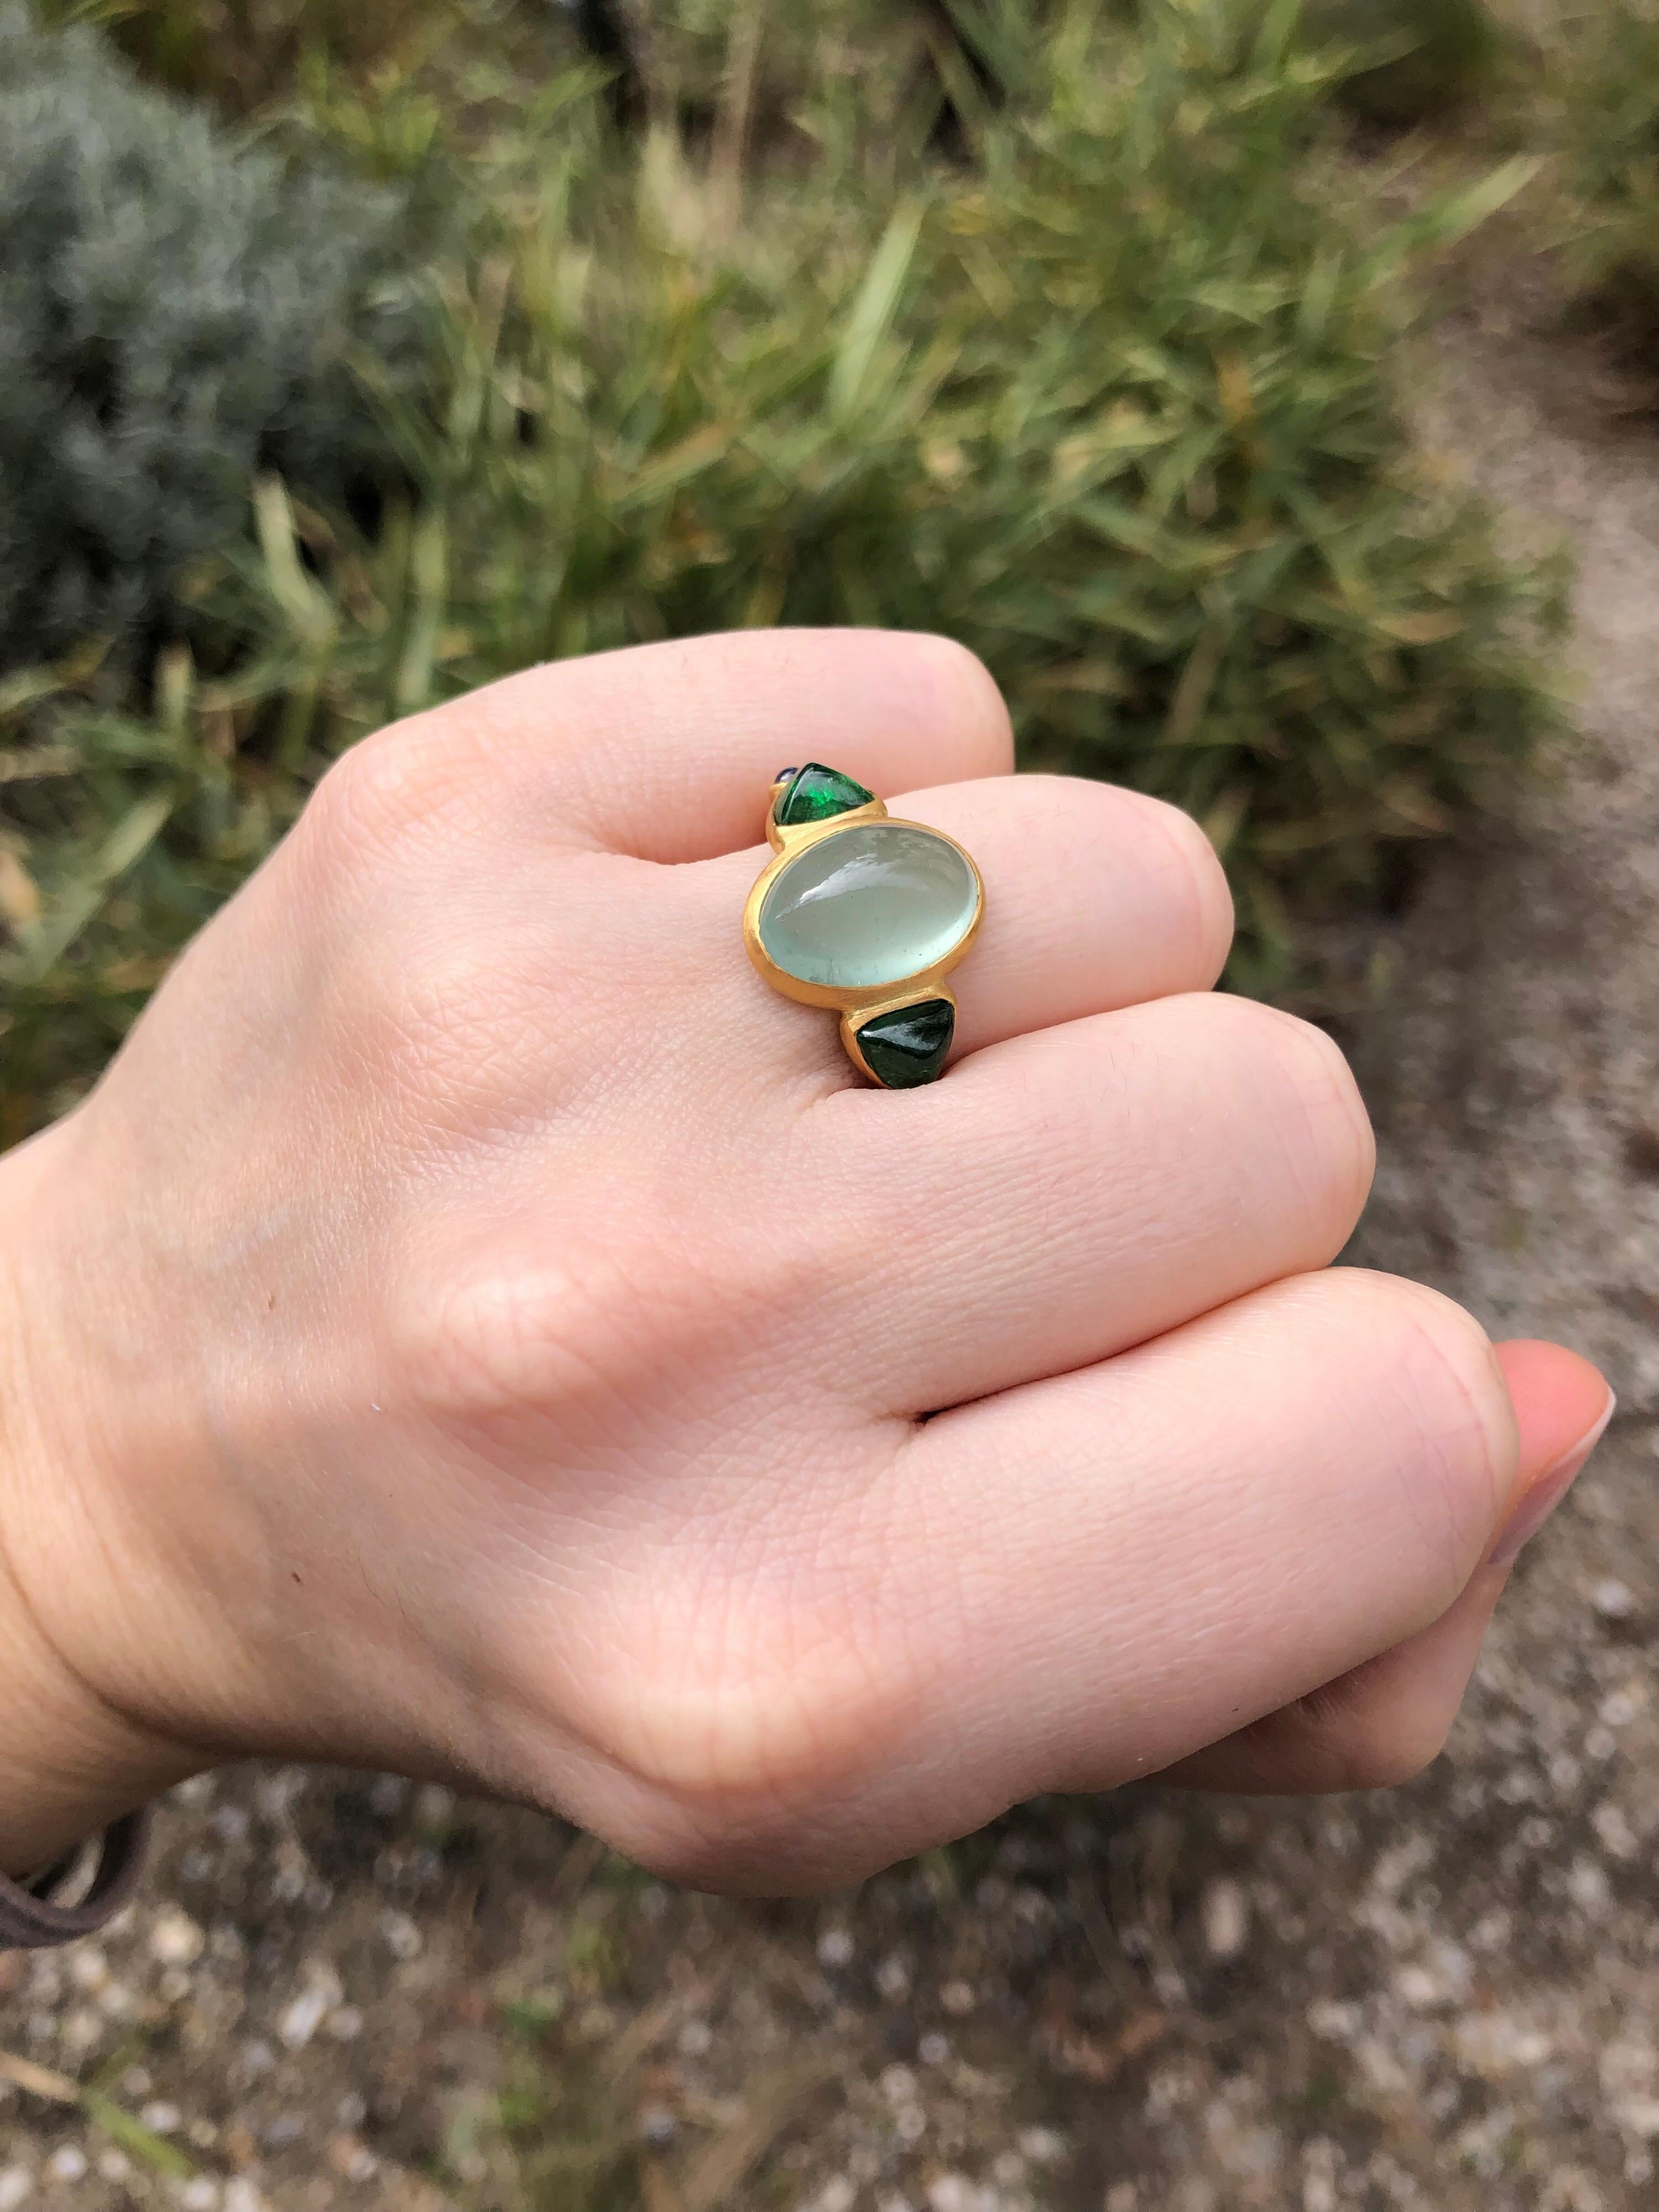 This delicate ring is composed of 5 stones in line: 1 green Aquamarine cabochon, 2 trillion tsavorite cabochons and 2 blue sapphire cabochons. 
The center stone is an aquamarine of 5.93 cts. The tsavorites total weight is 2.44cts. The 2 sapphire